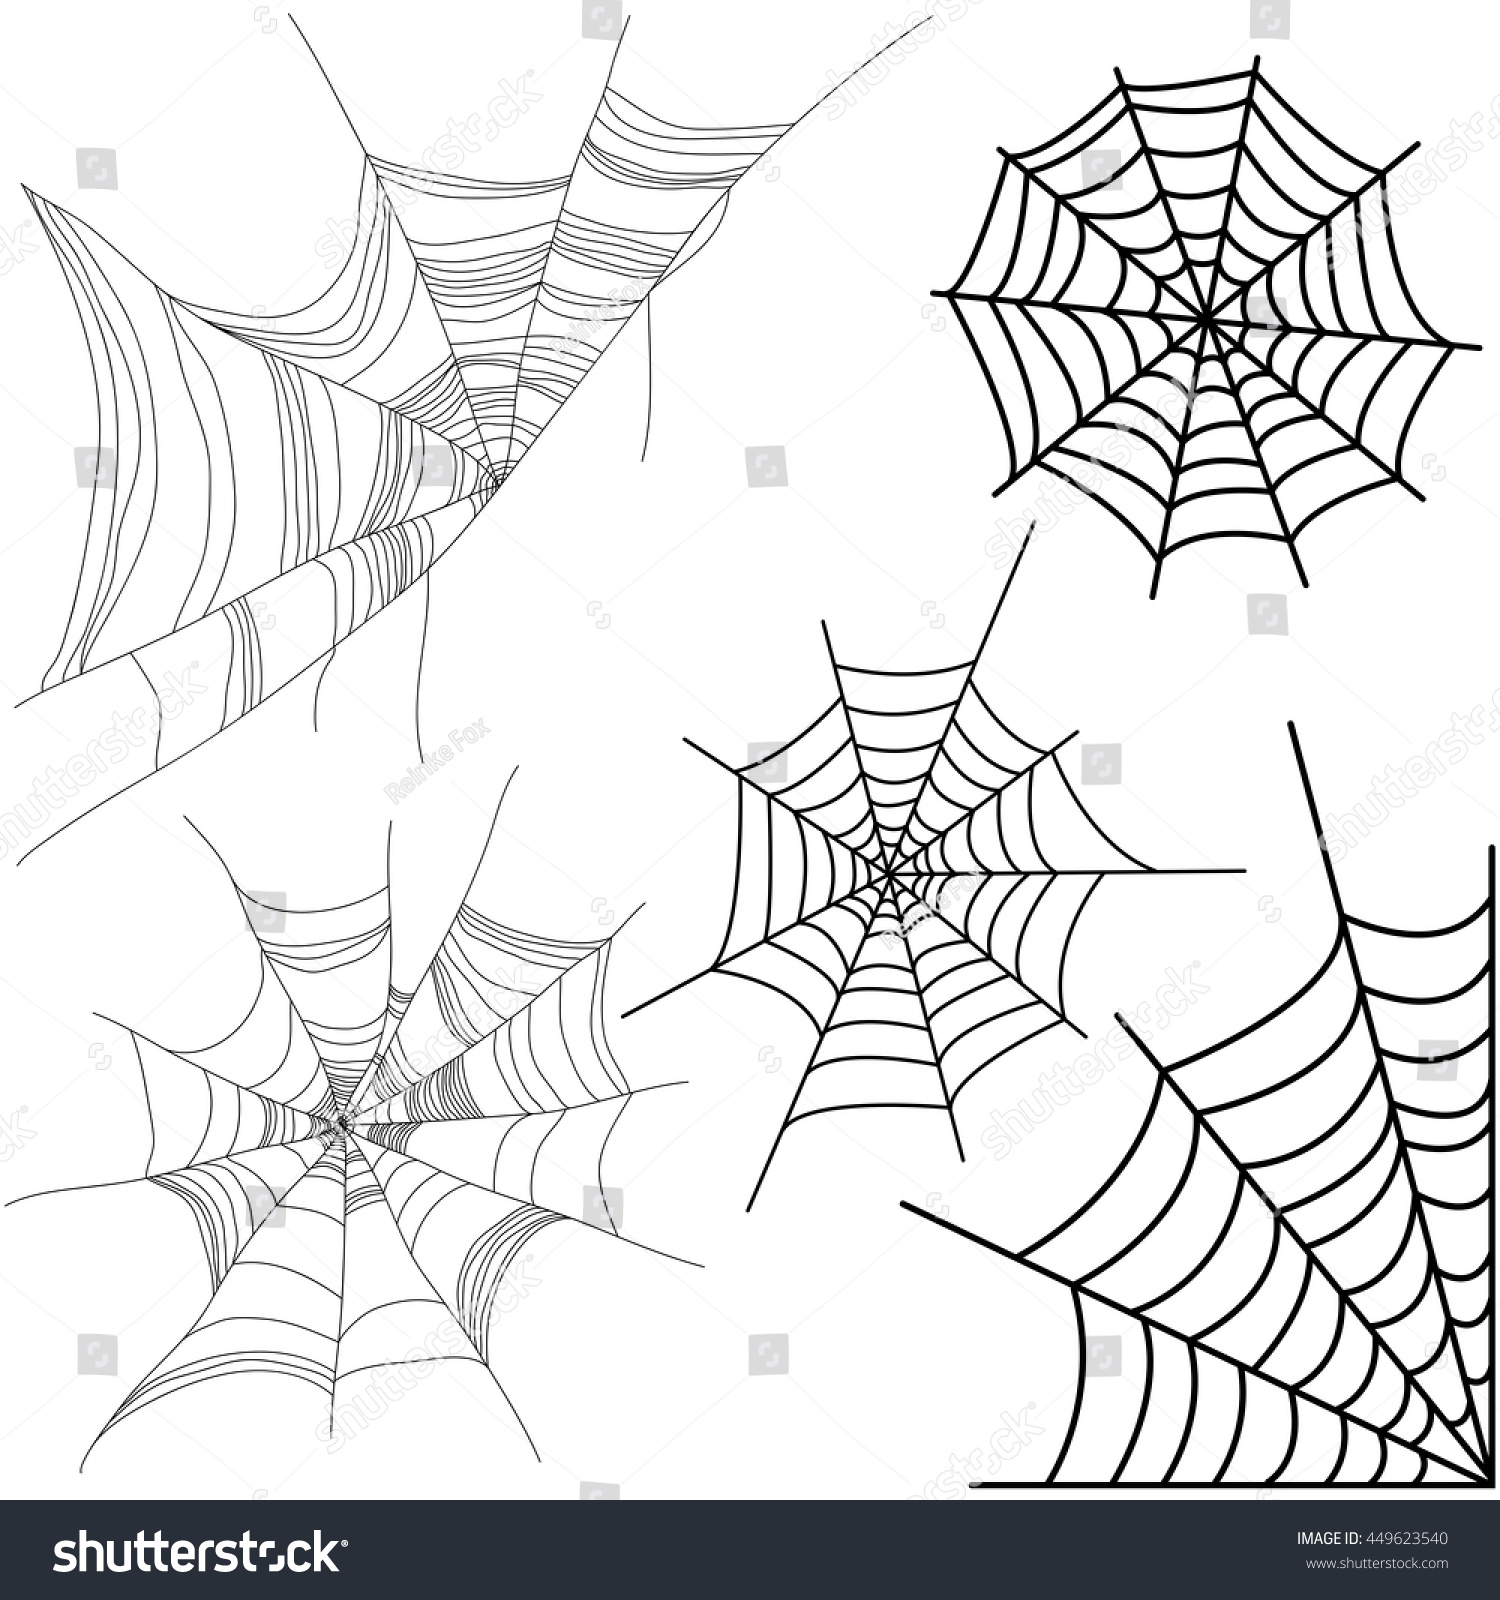 Vector set of spider web isolated on white background.  #449623540